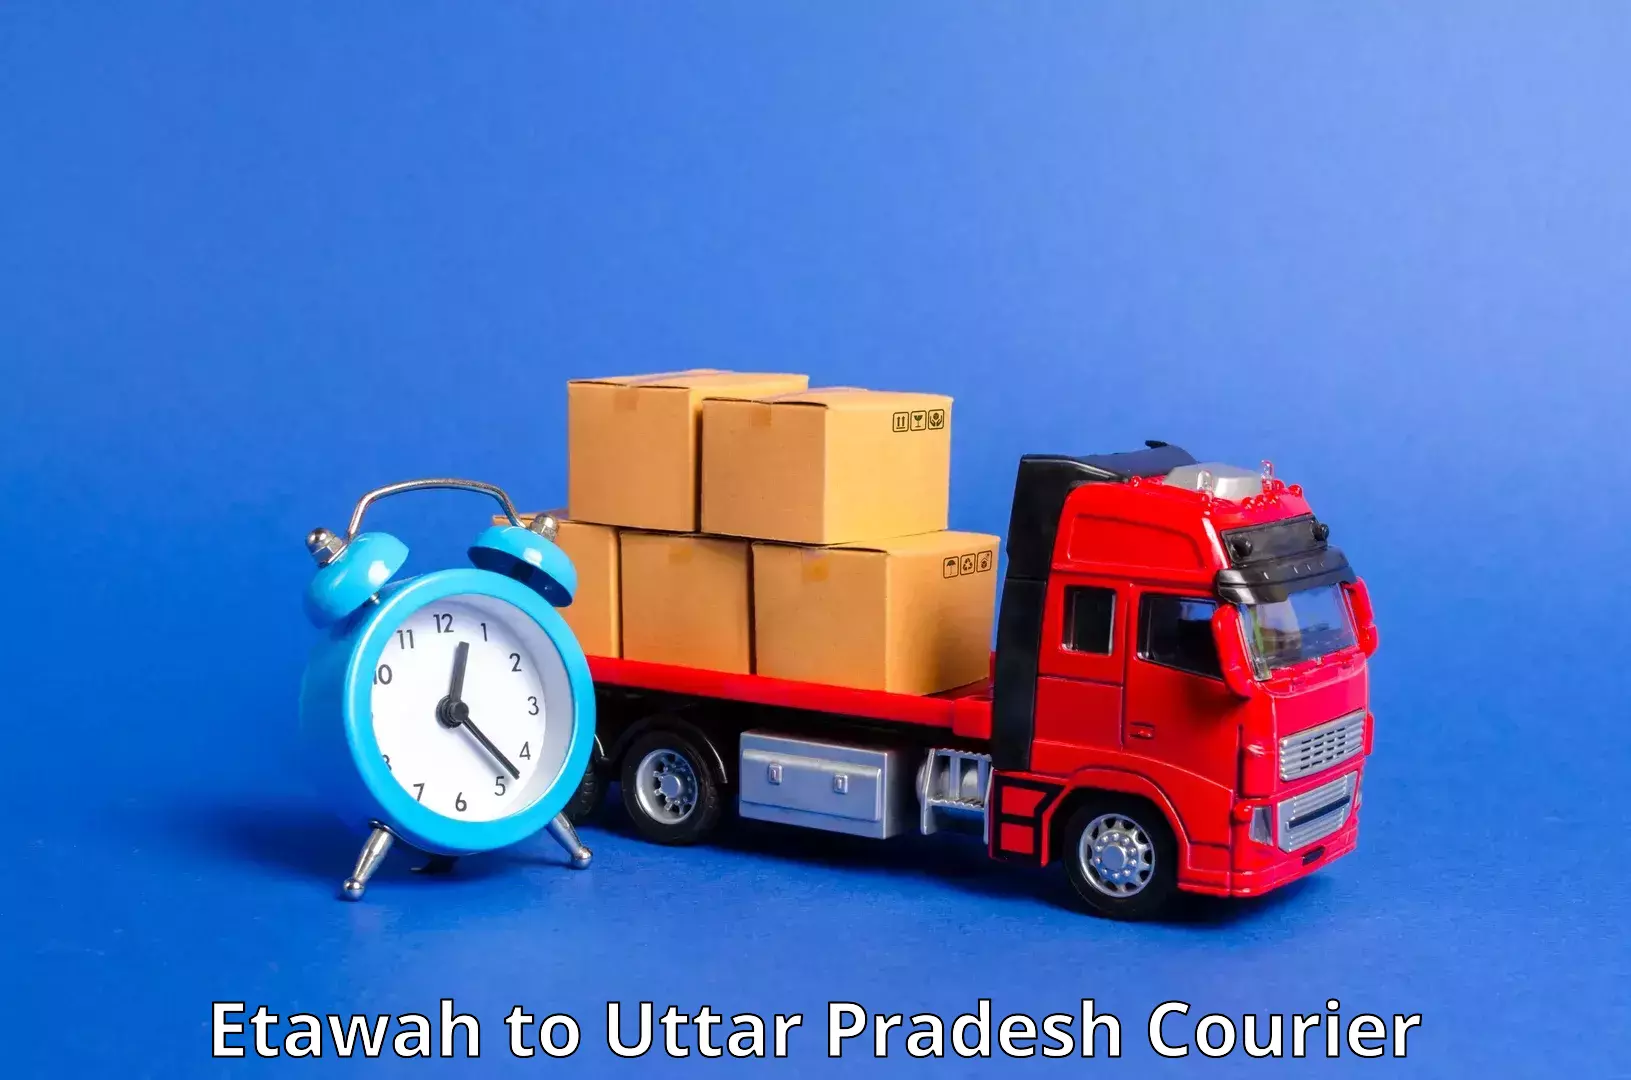 Nationwide delivery network Etawah to Bareilly